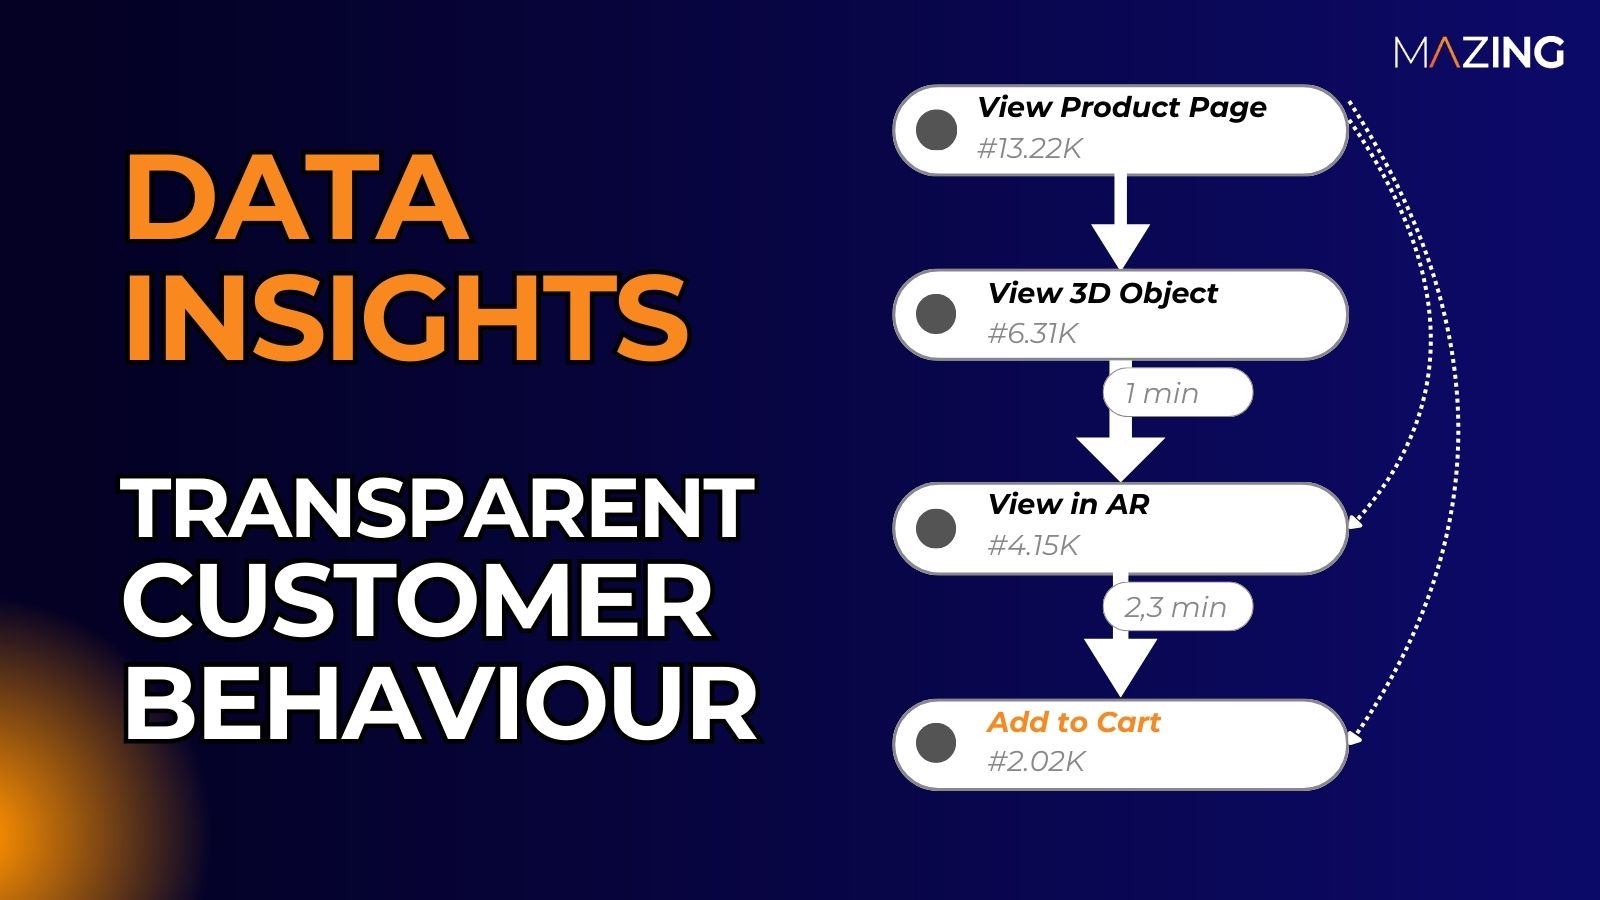 Data Insights for Product Pages